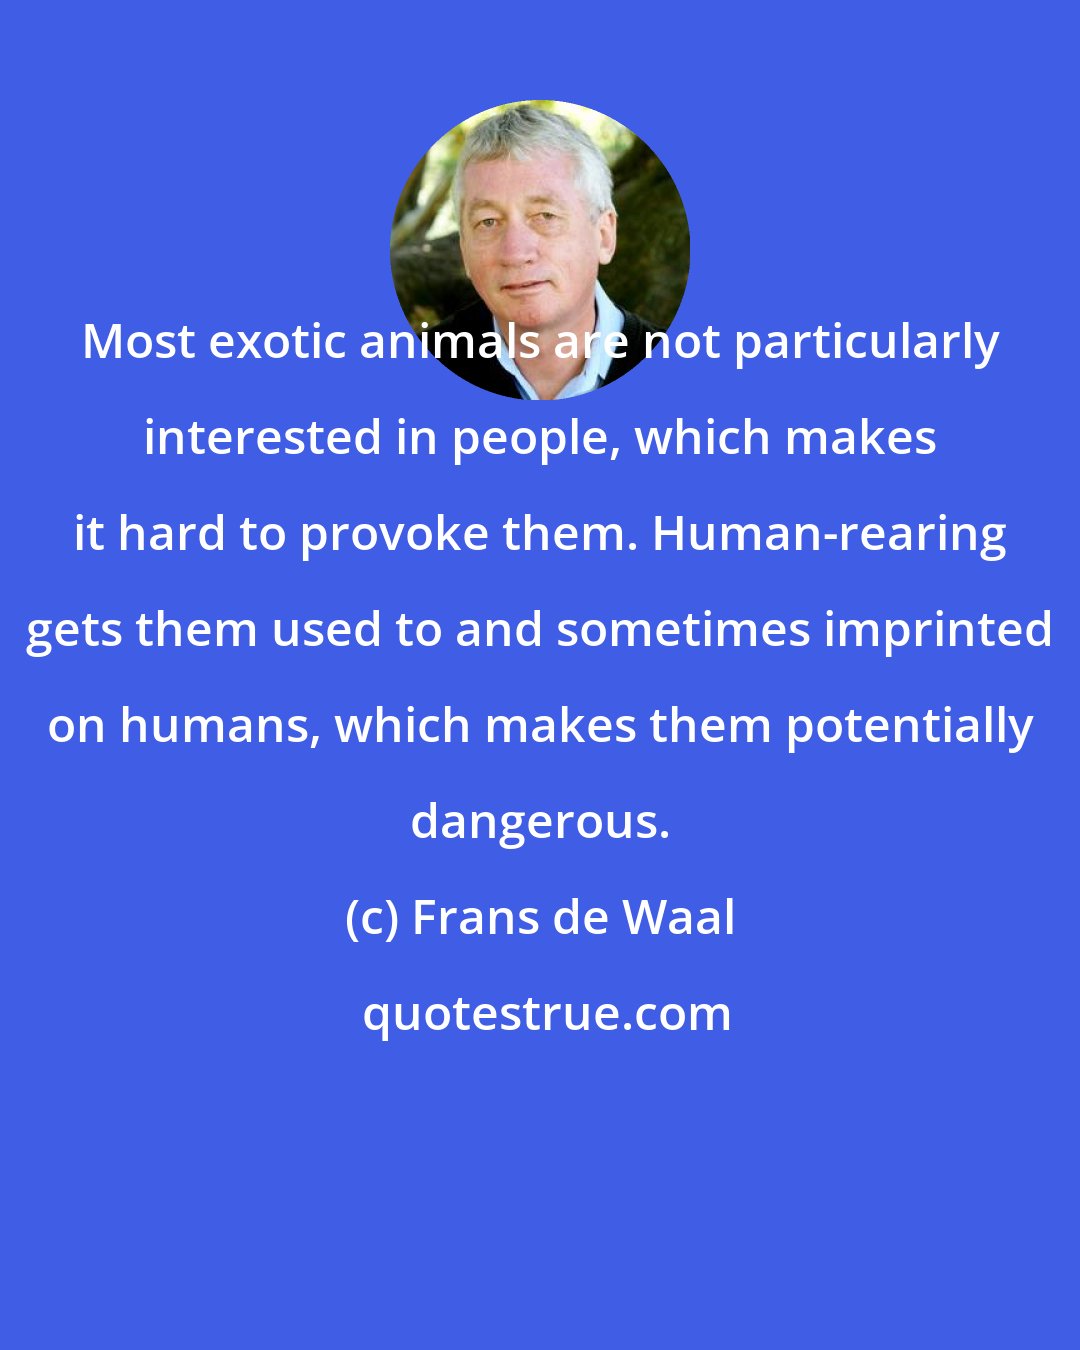 Frans de Waal: Most exotic animals are not particularly interested in people, which makes it hard to provoke them. Human-rearing gets them used to and sometimes imprinted on humans, which makes them potentially dangerous.